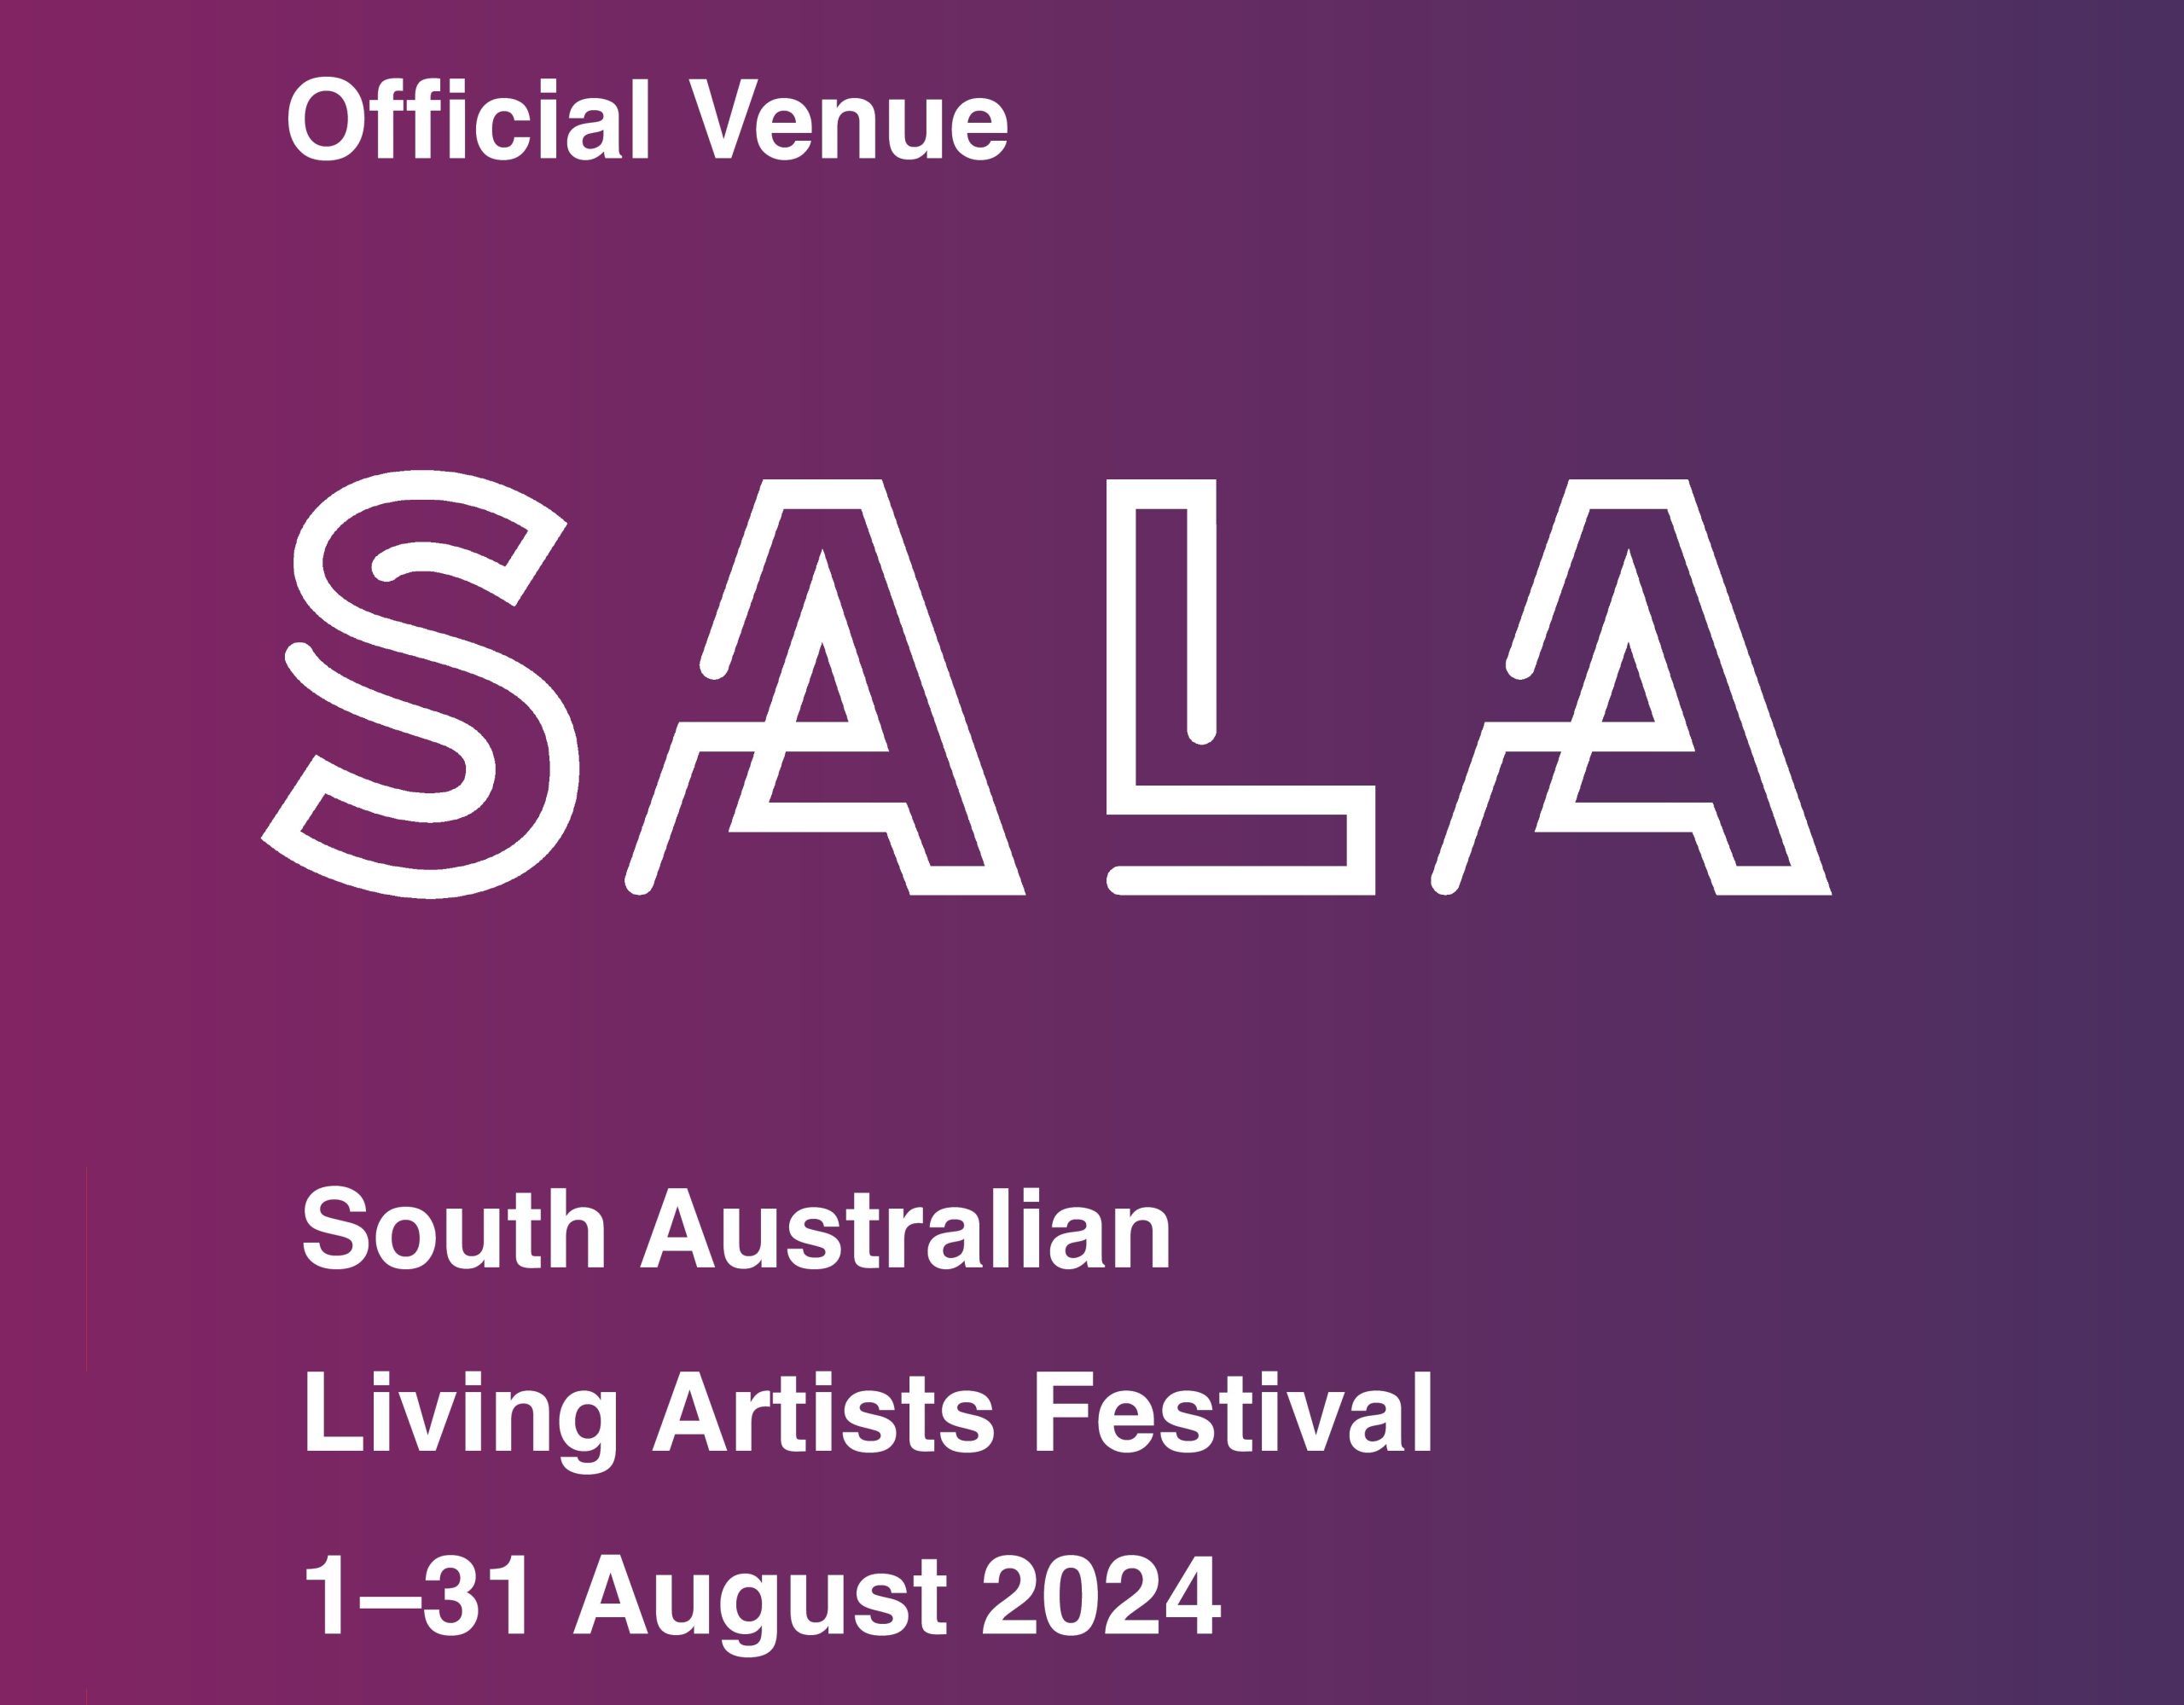 St Agnes Shopping Centre is an Official Venue for SALA 2024